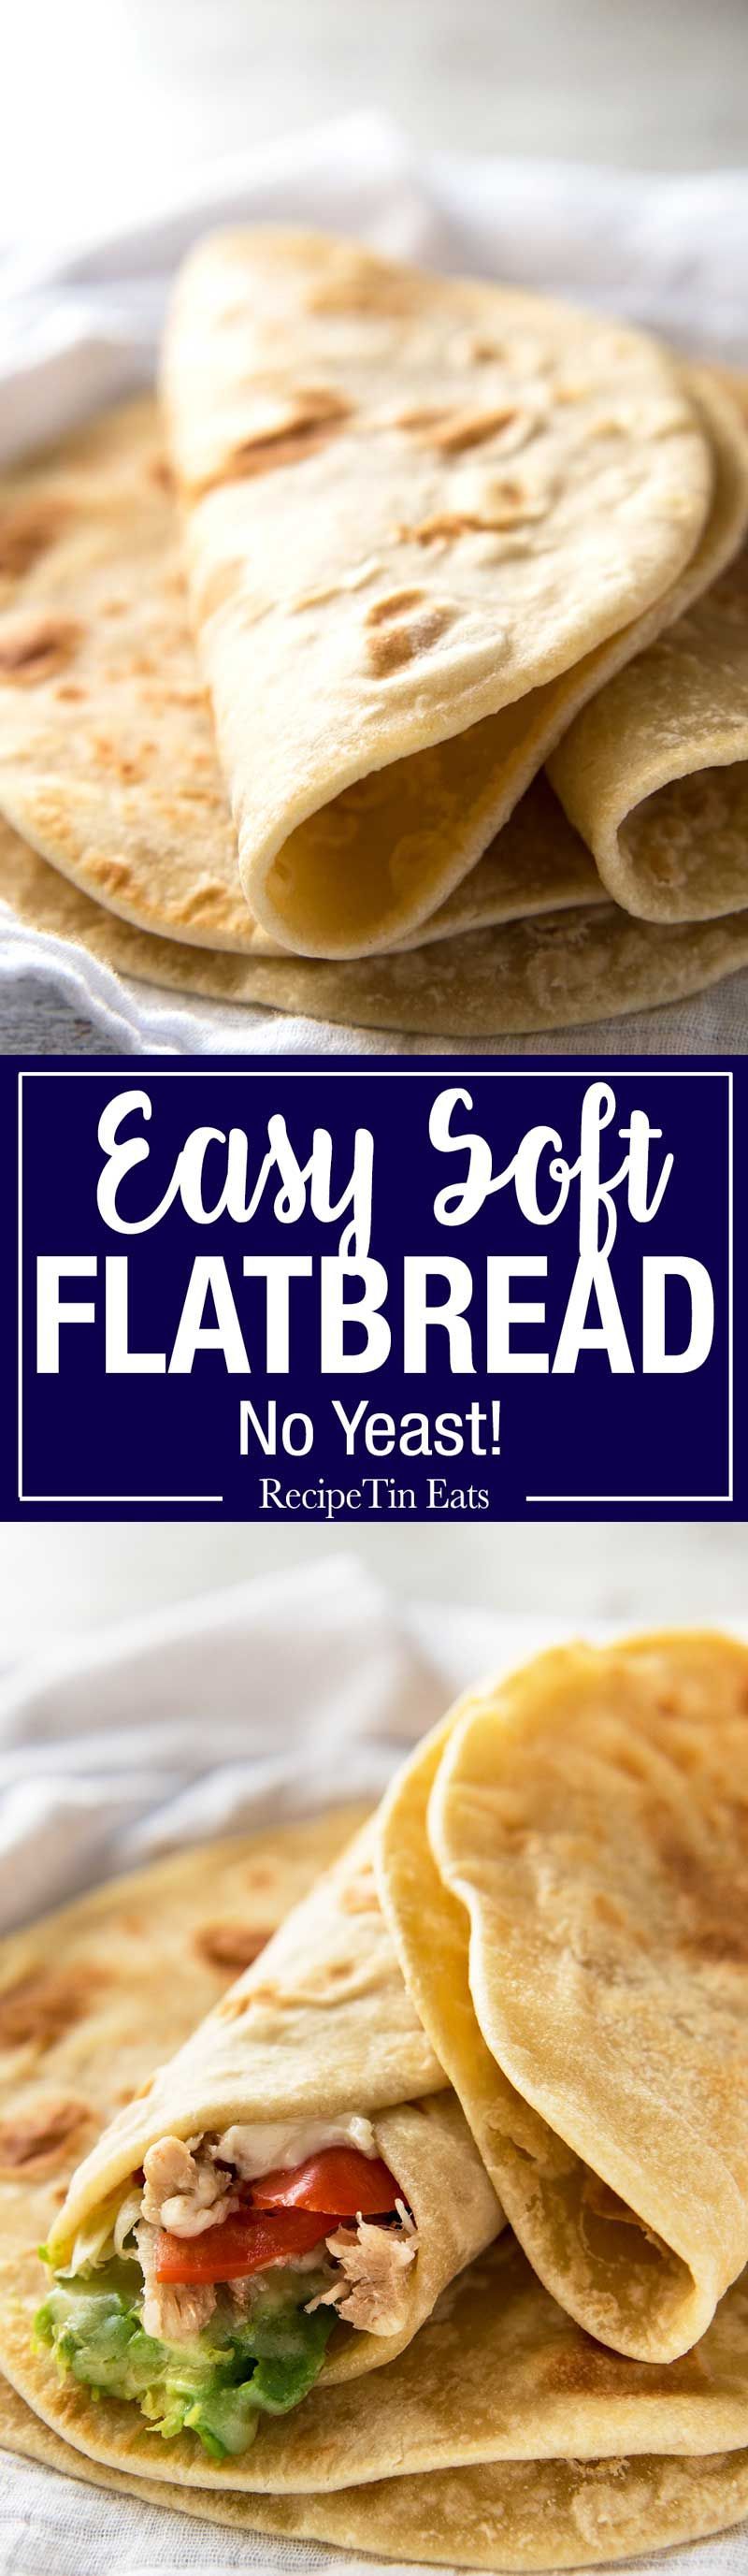 This flatbread recipe is made without yeast, yet is soft and pliable and wonderfully moist. www.recipe